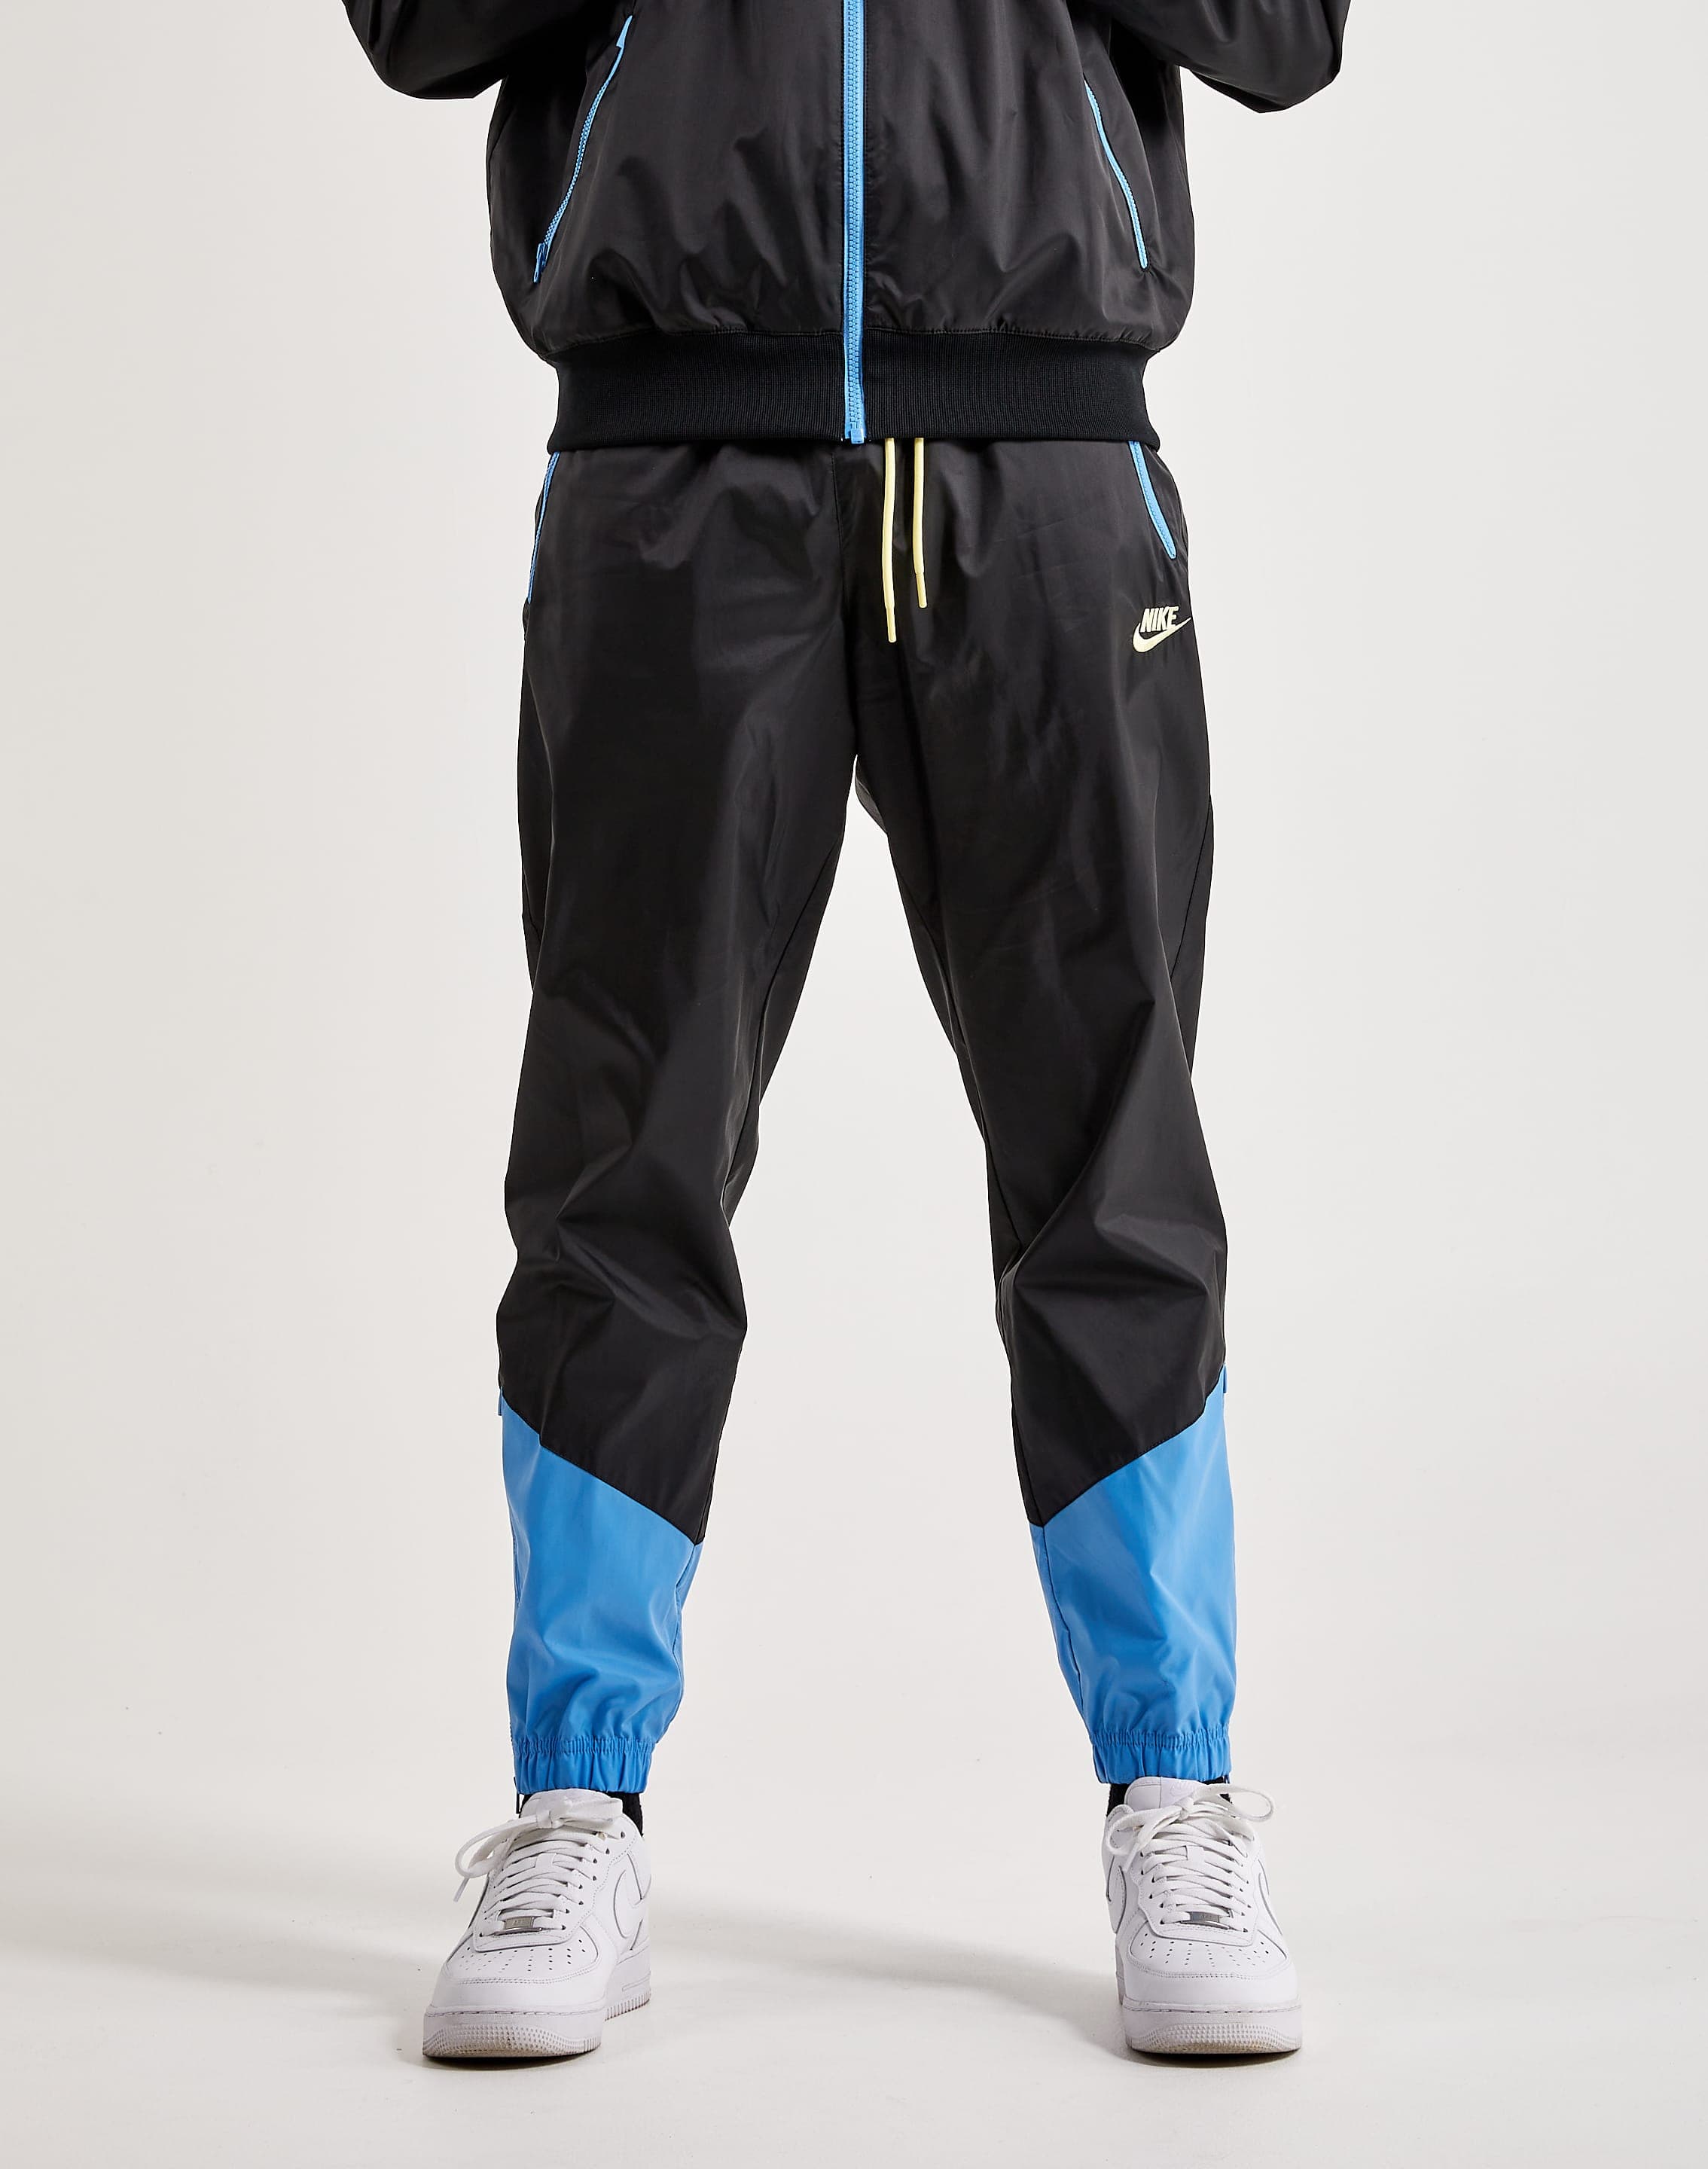 Nike Vintage Nike Mesh Lined Wind Pants Joggers Trainers Track | Grailed